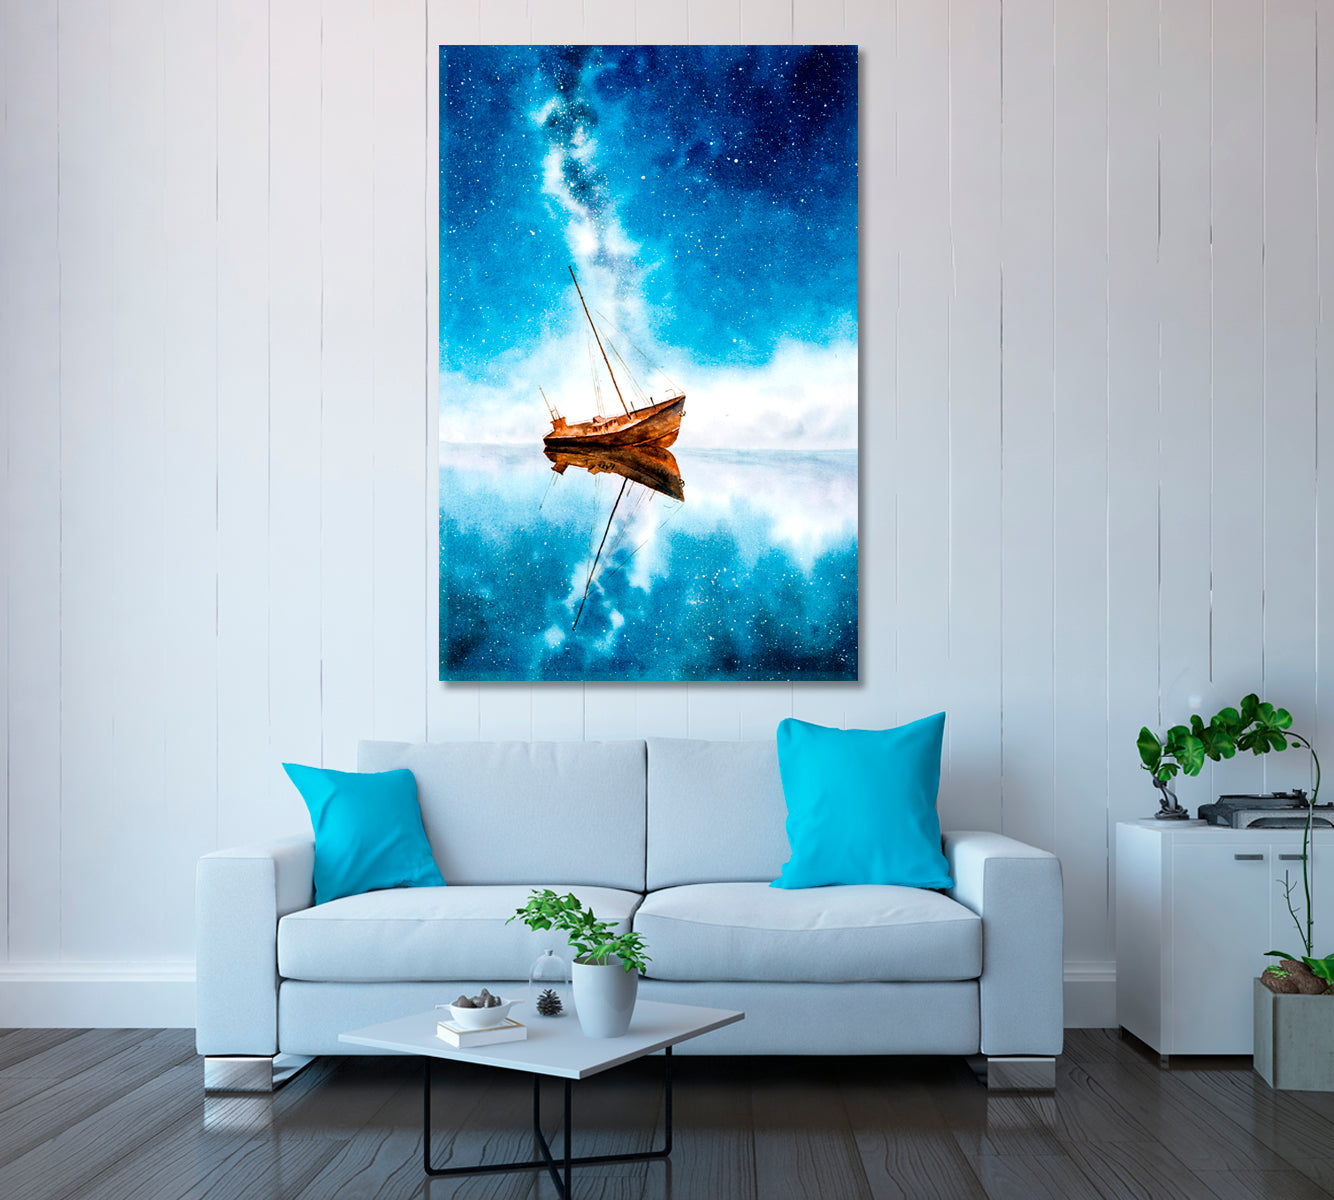 Abandoned Ship with Milky Way Canvas Print ArtLexy 1 Panel 16"x24" inches 